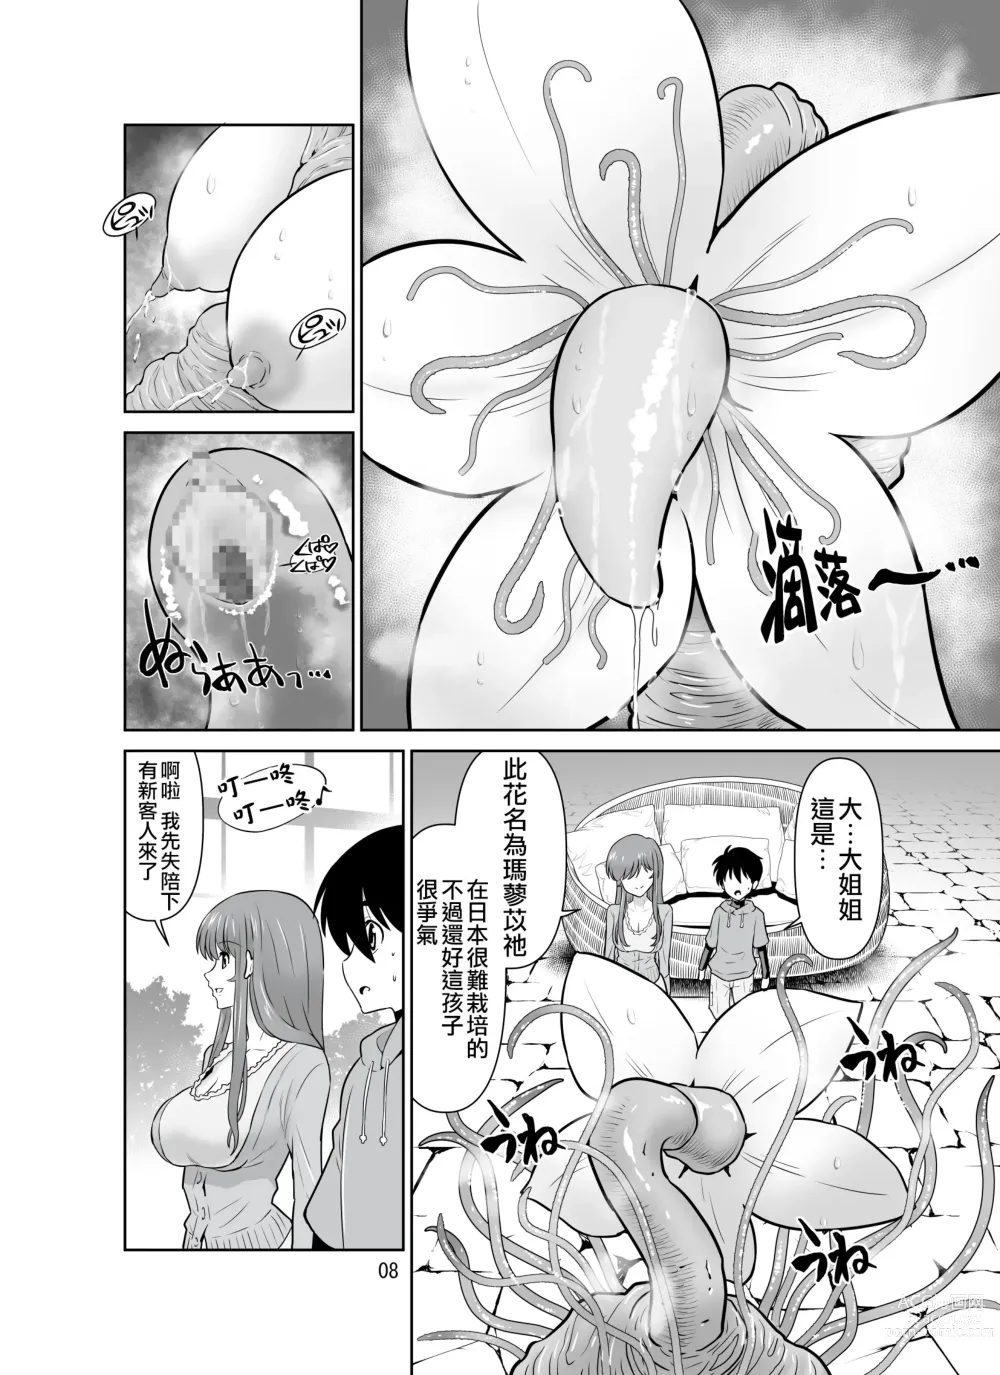 Page 8 of doujinshi 触手花店的大姐姐